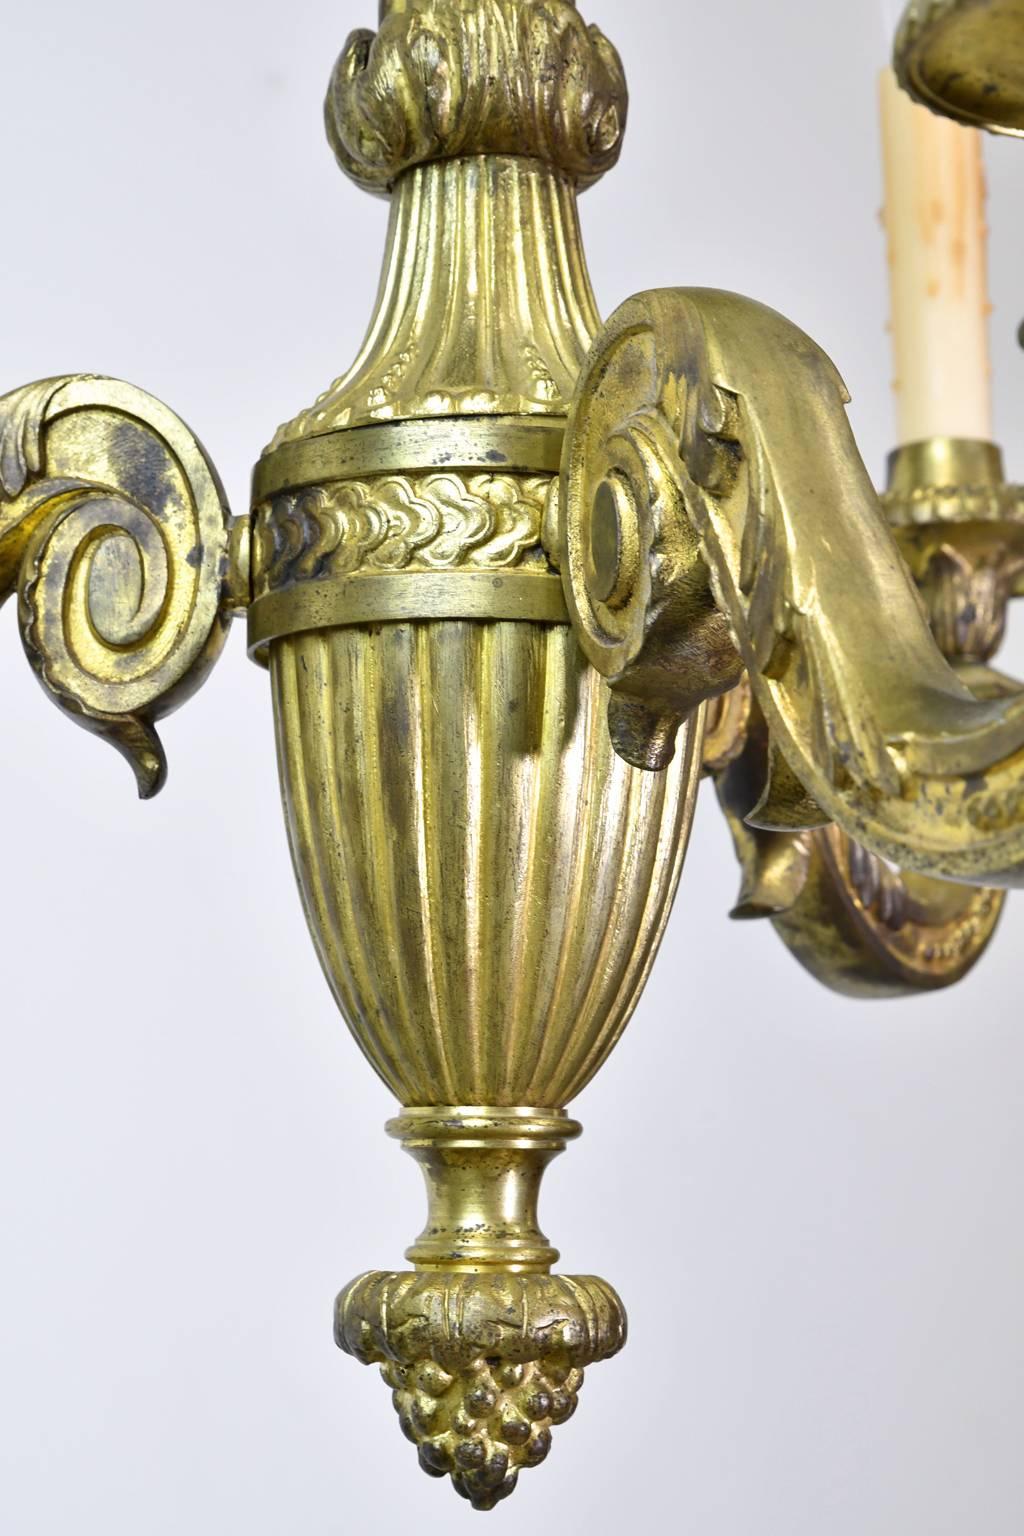 A lovely French Belle Époque chandelier in bronze doré in the style of Louis XVI with three lights, France, circa 1900. 
A beautiful accent in a small foyer, powder room, or a small dining area!
Measures: 18 1/4